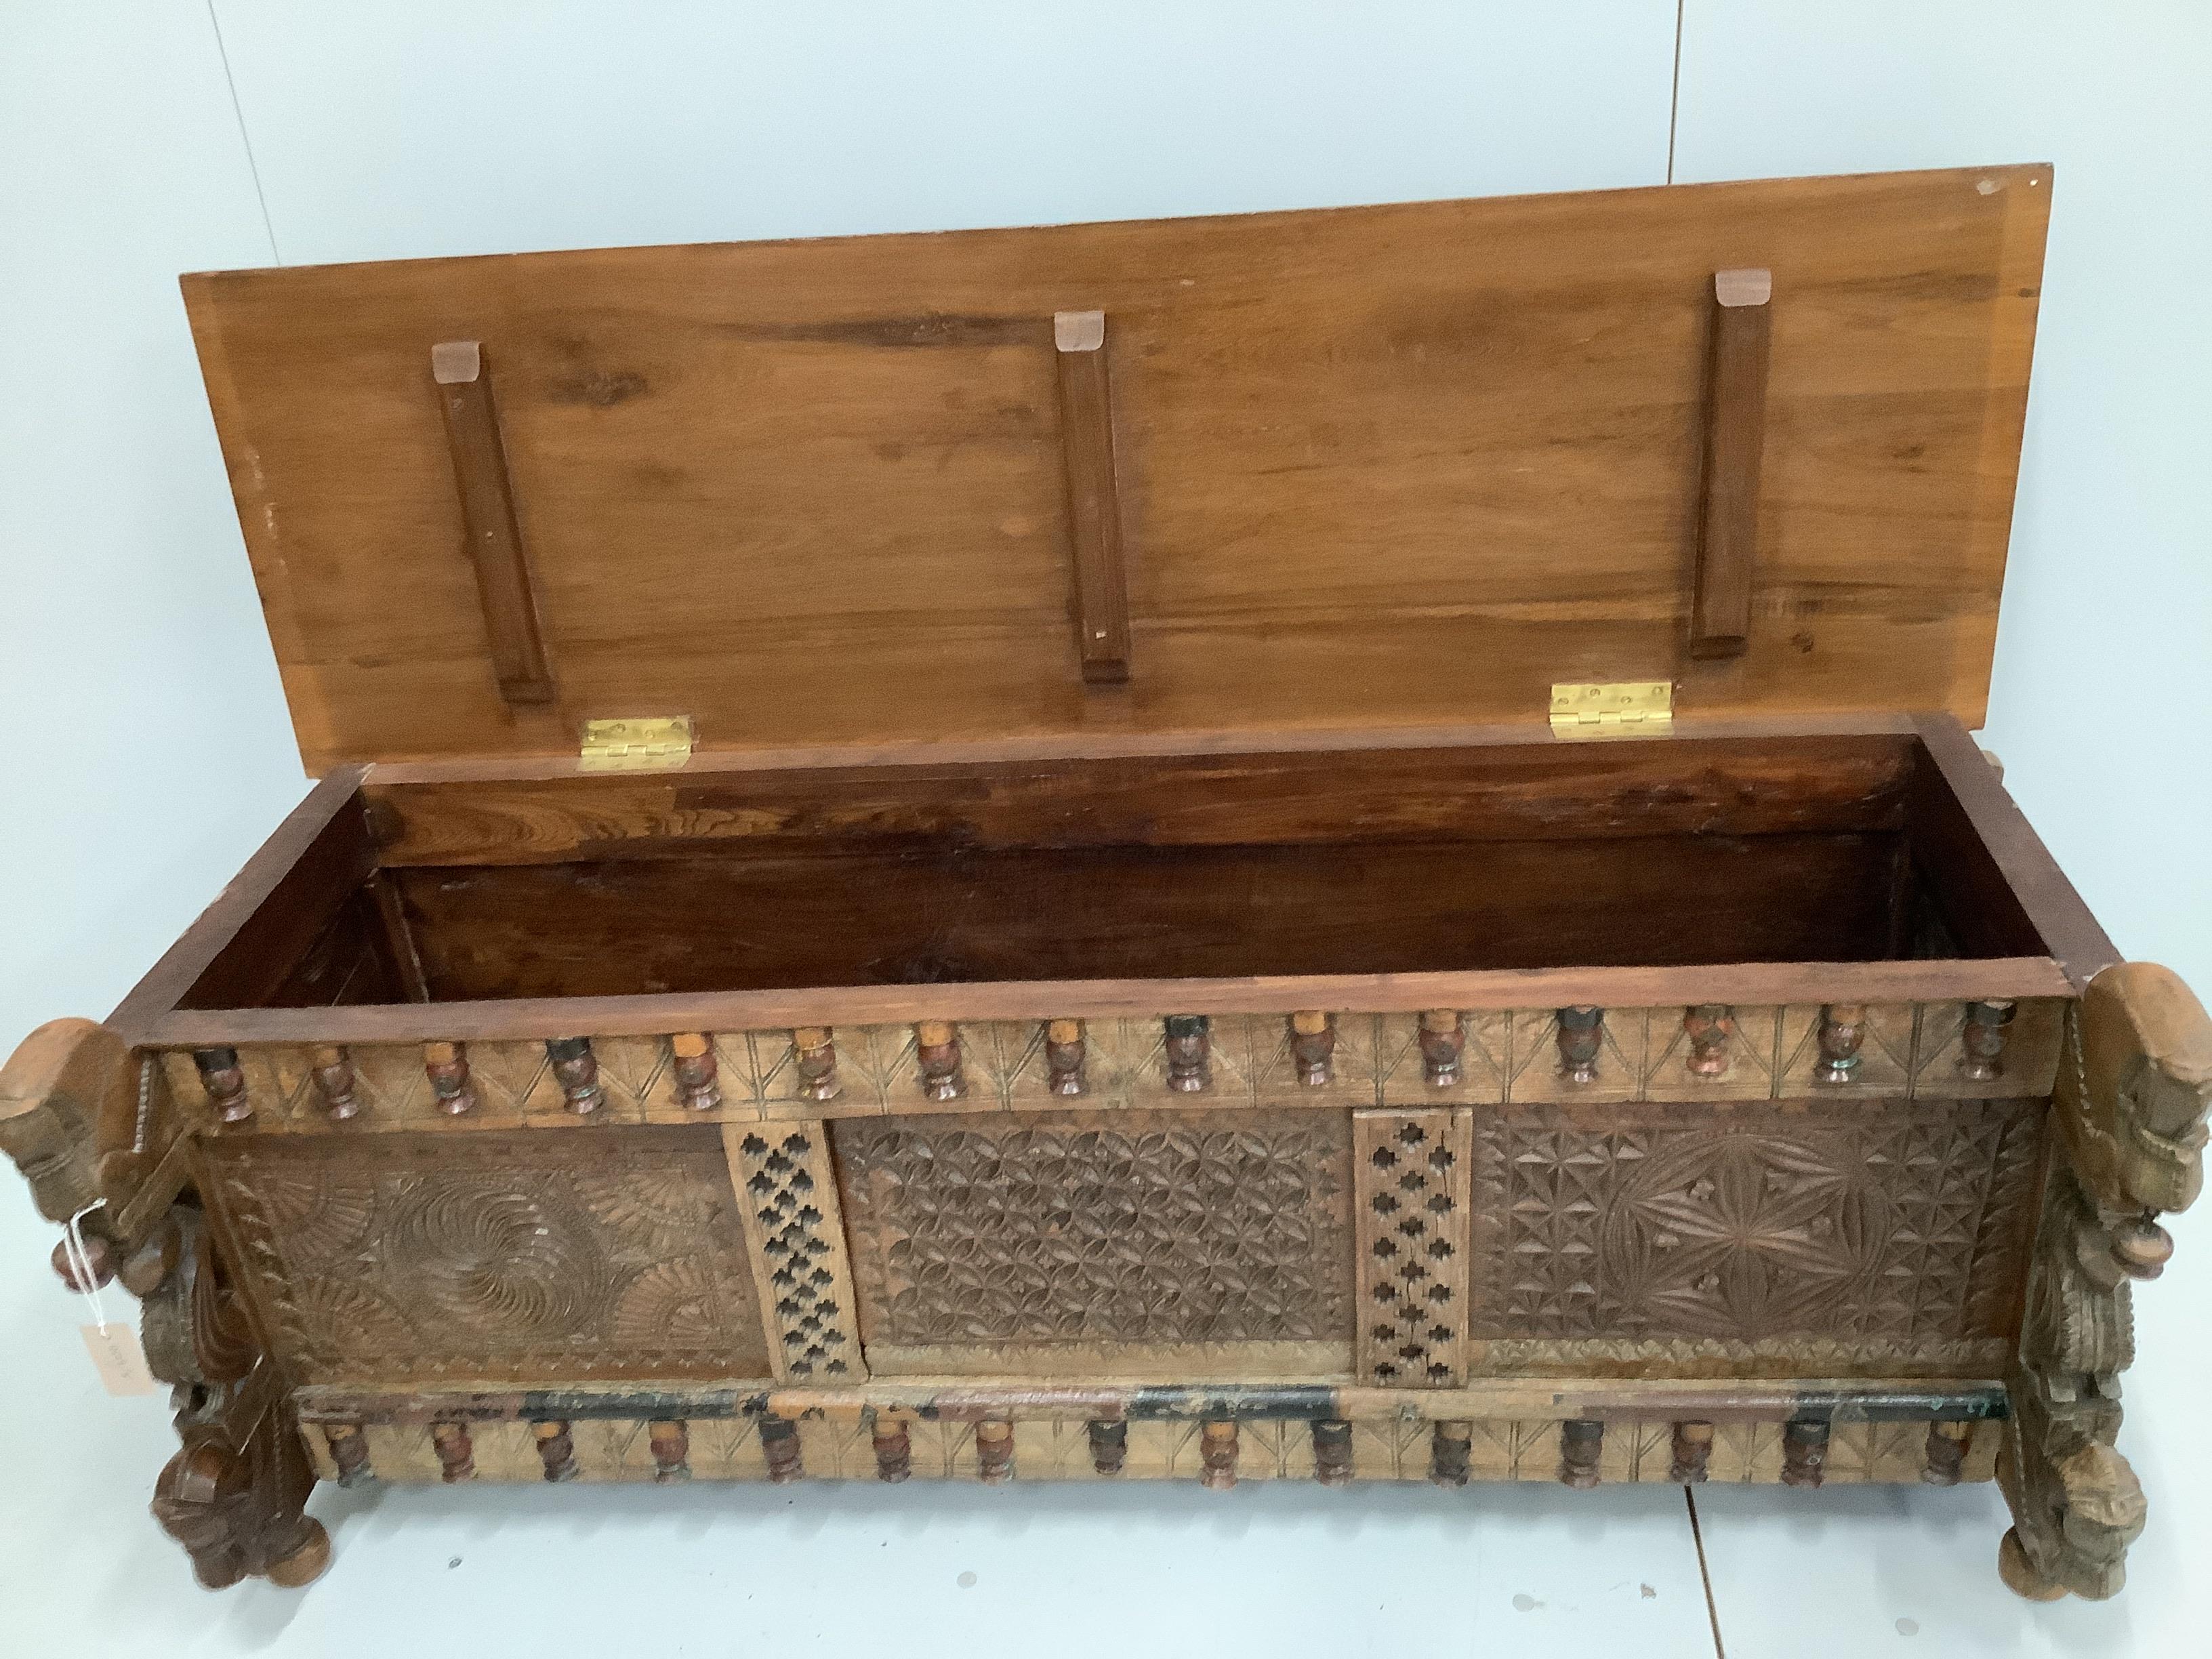 An Indian carved and panelled hardwood low chest, with figural motifs, width 148cm, depth 60cm, height 57cm.